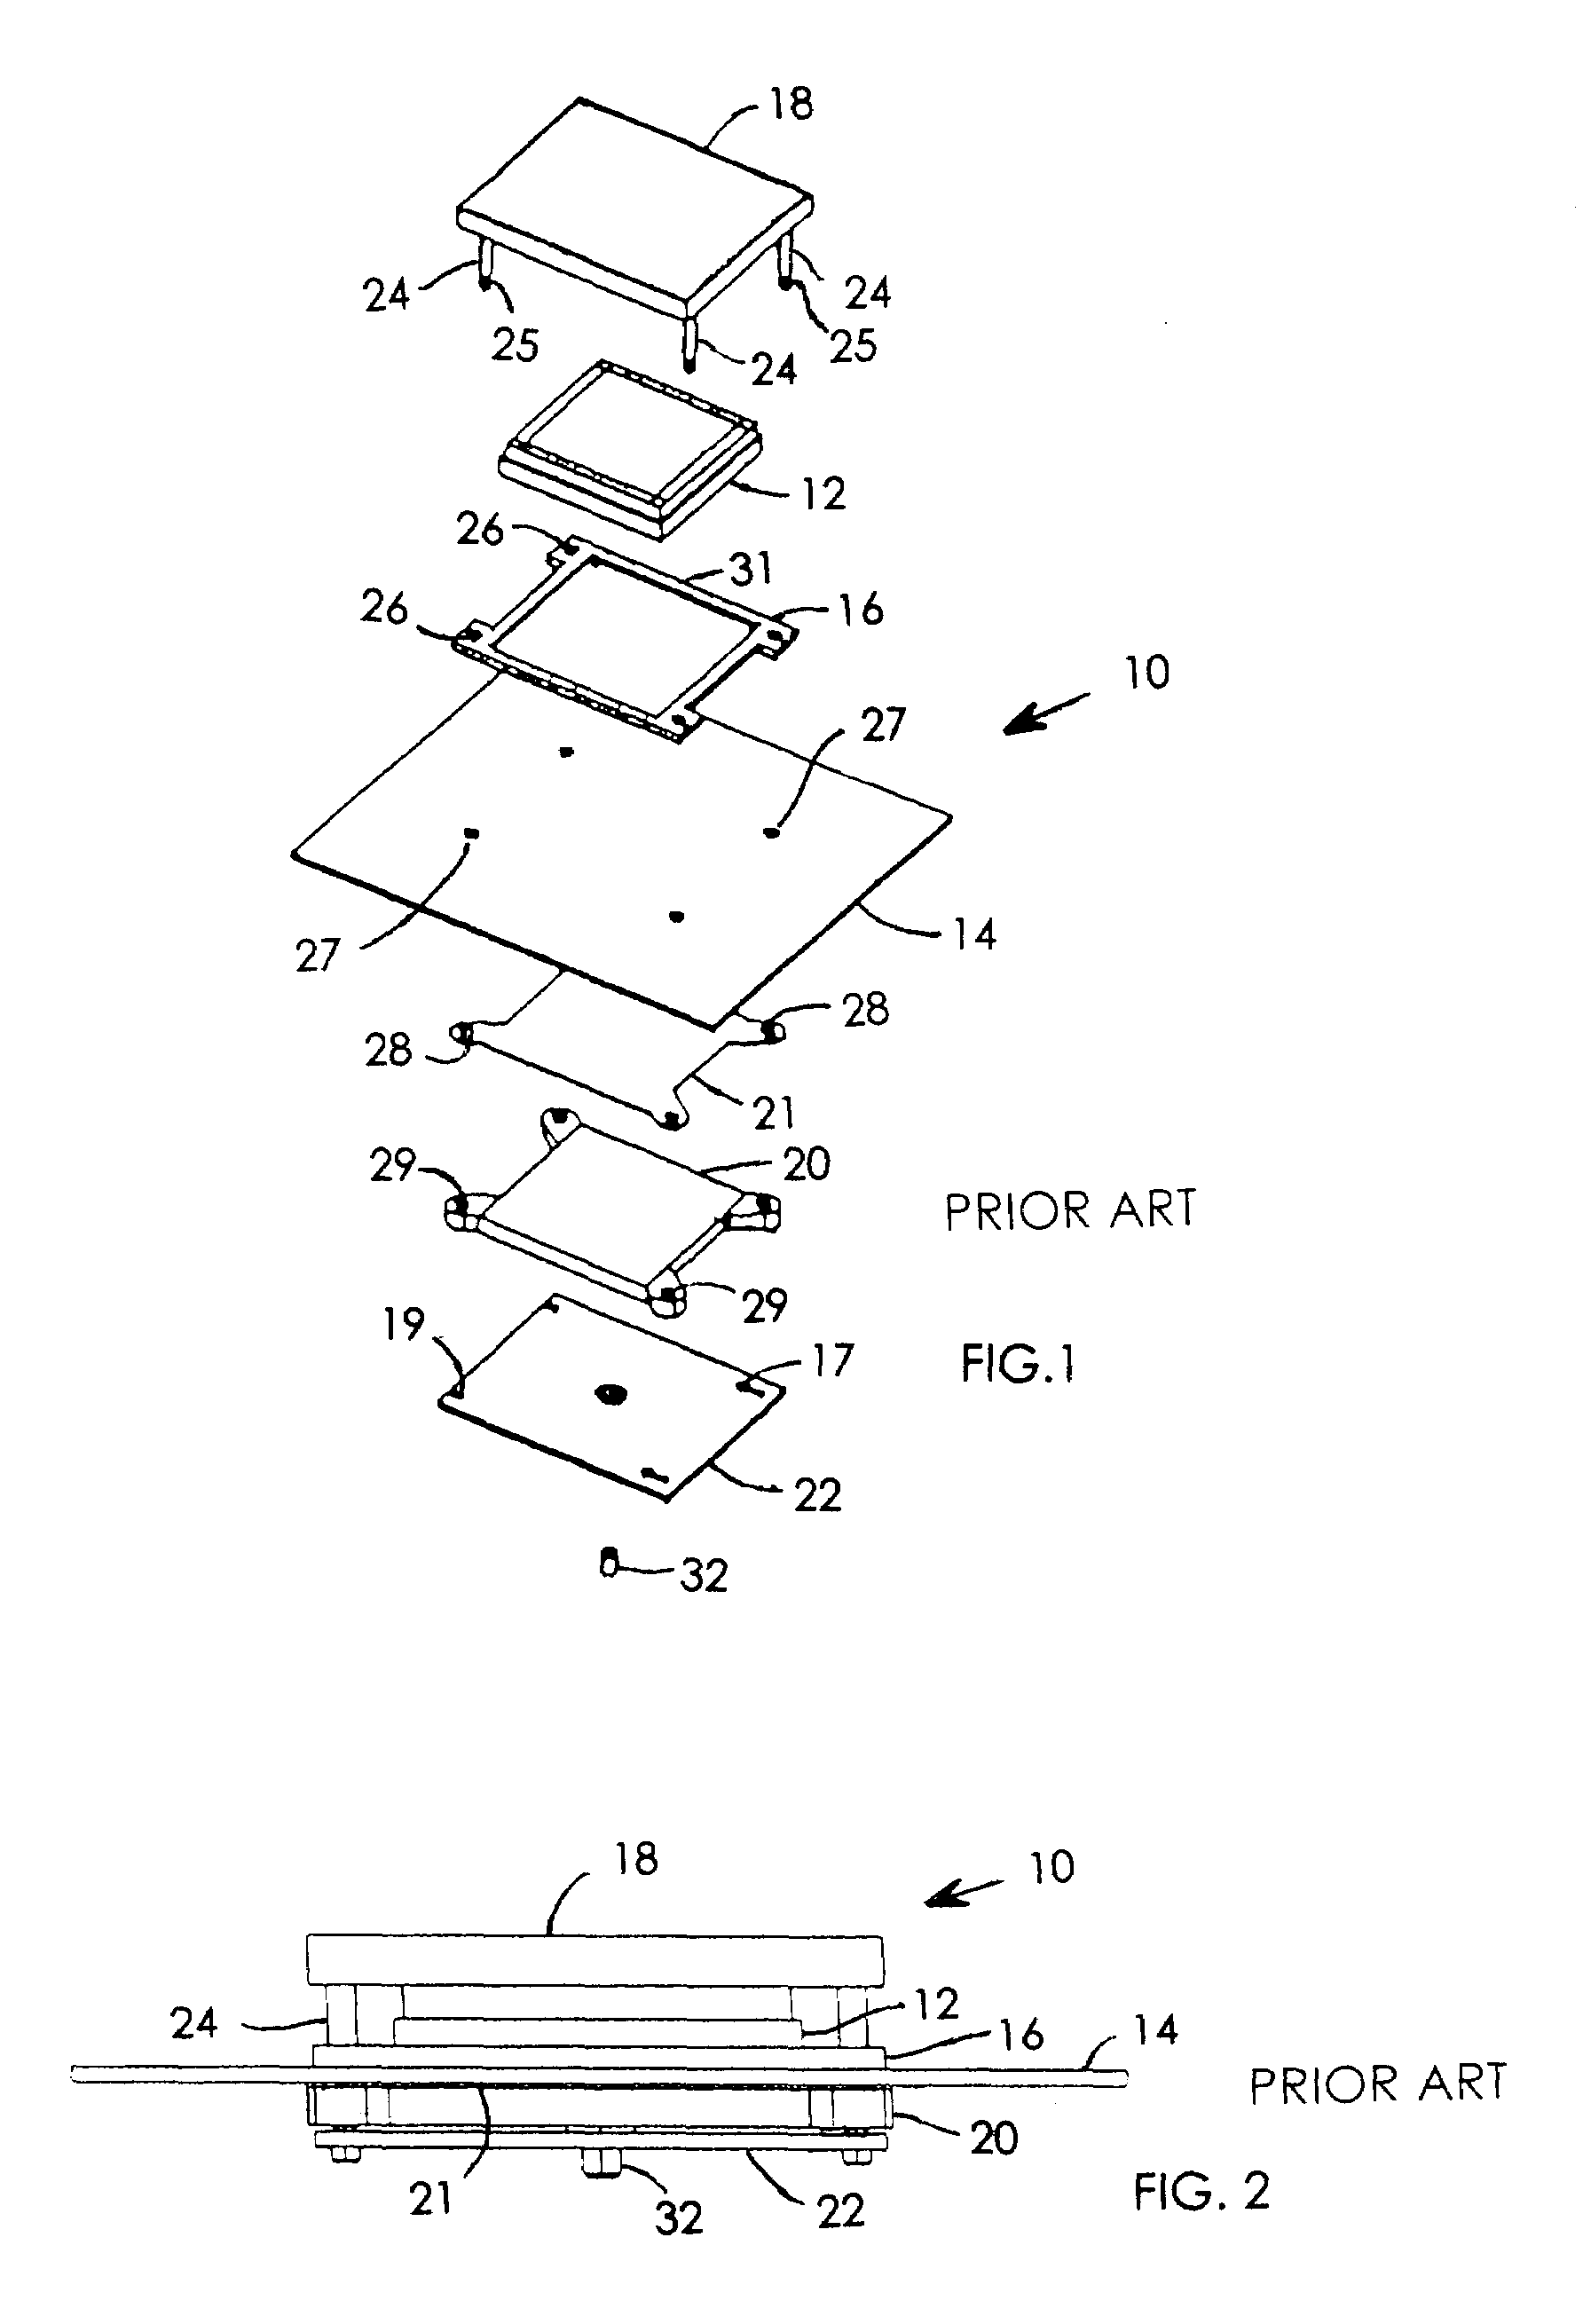 Conductive particle filled polymer electrical contact